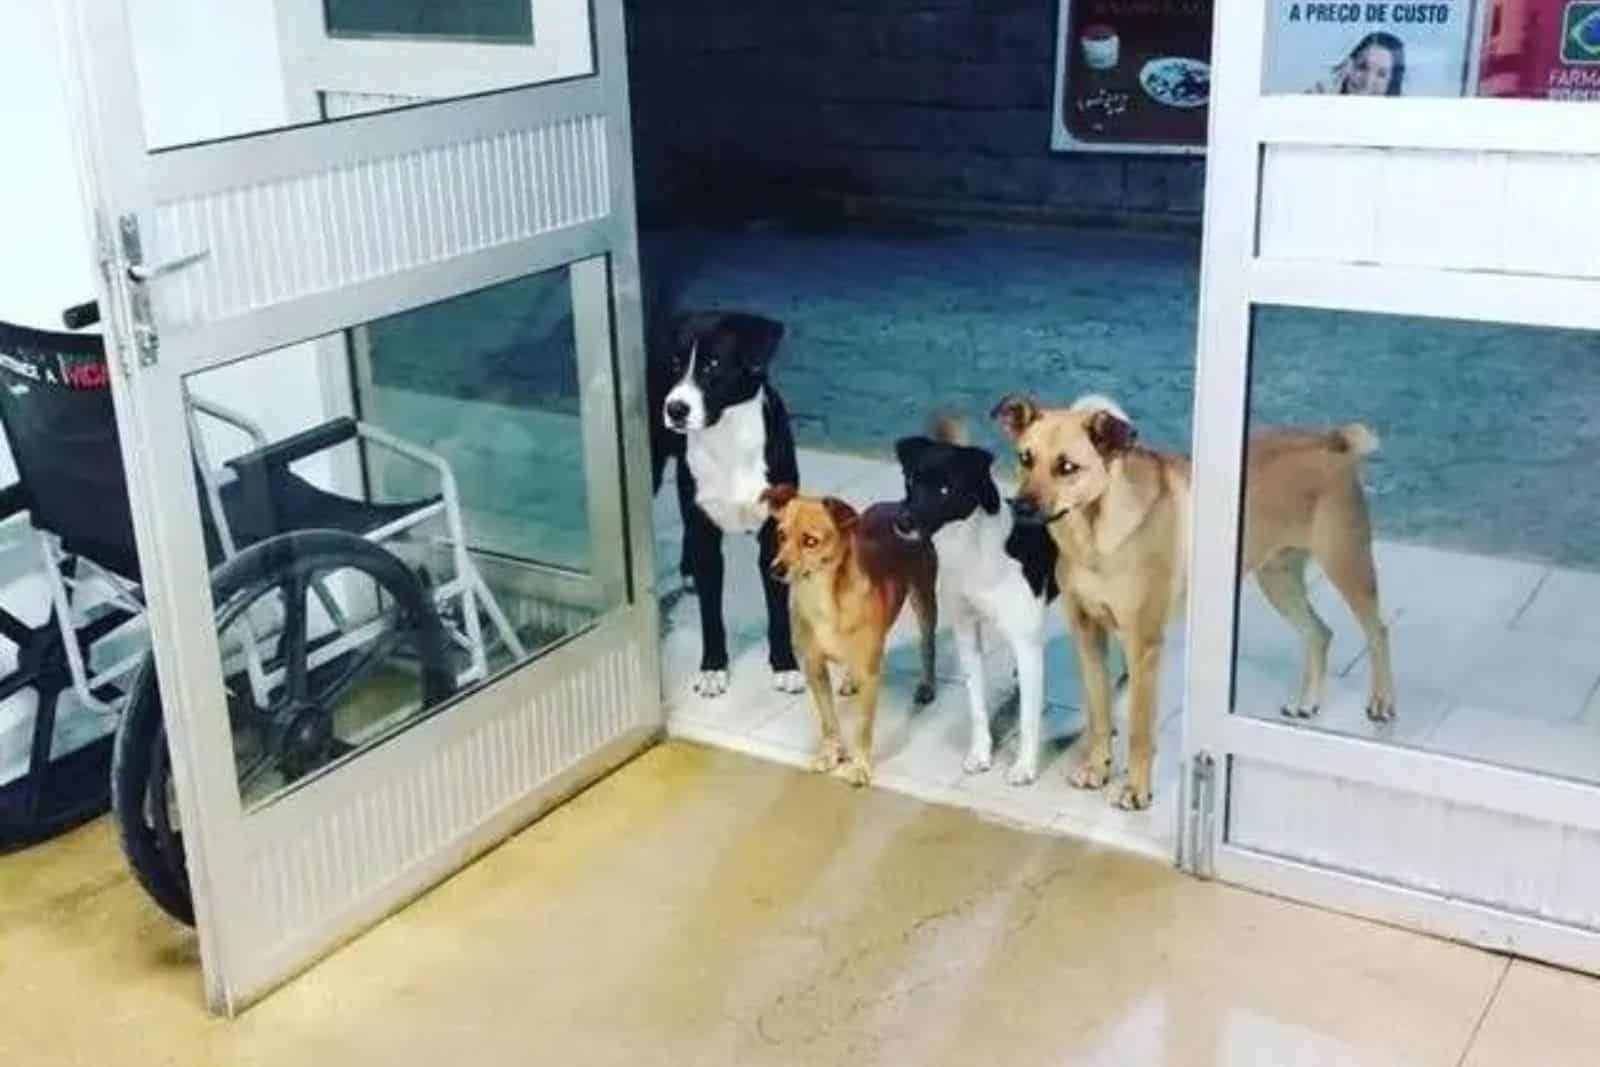 Strays Waited For Their Homeless Friend Outside The Hospital For Hours